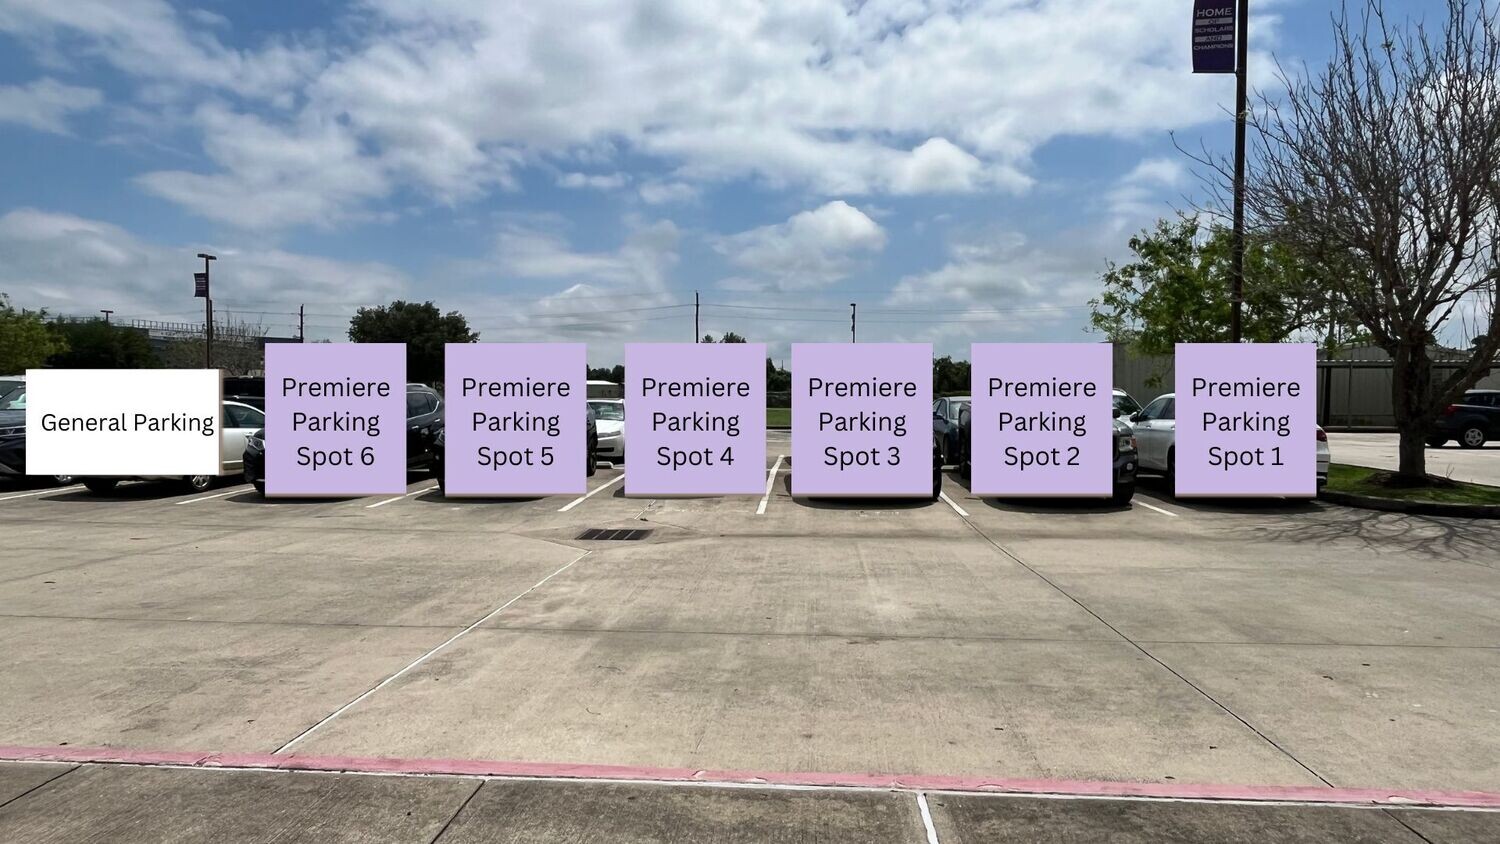 Spring Show Premiere Parking - Friday, May 3rd